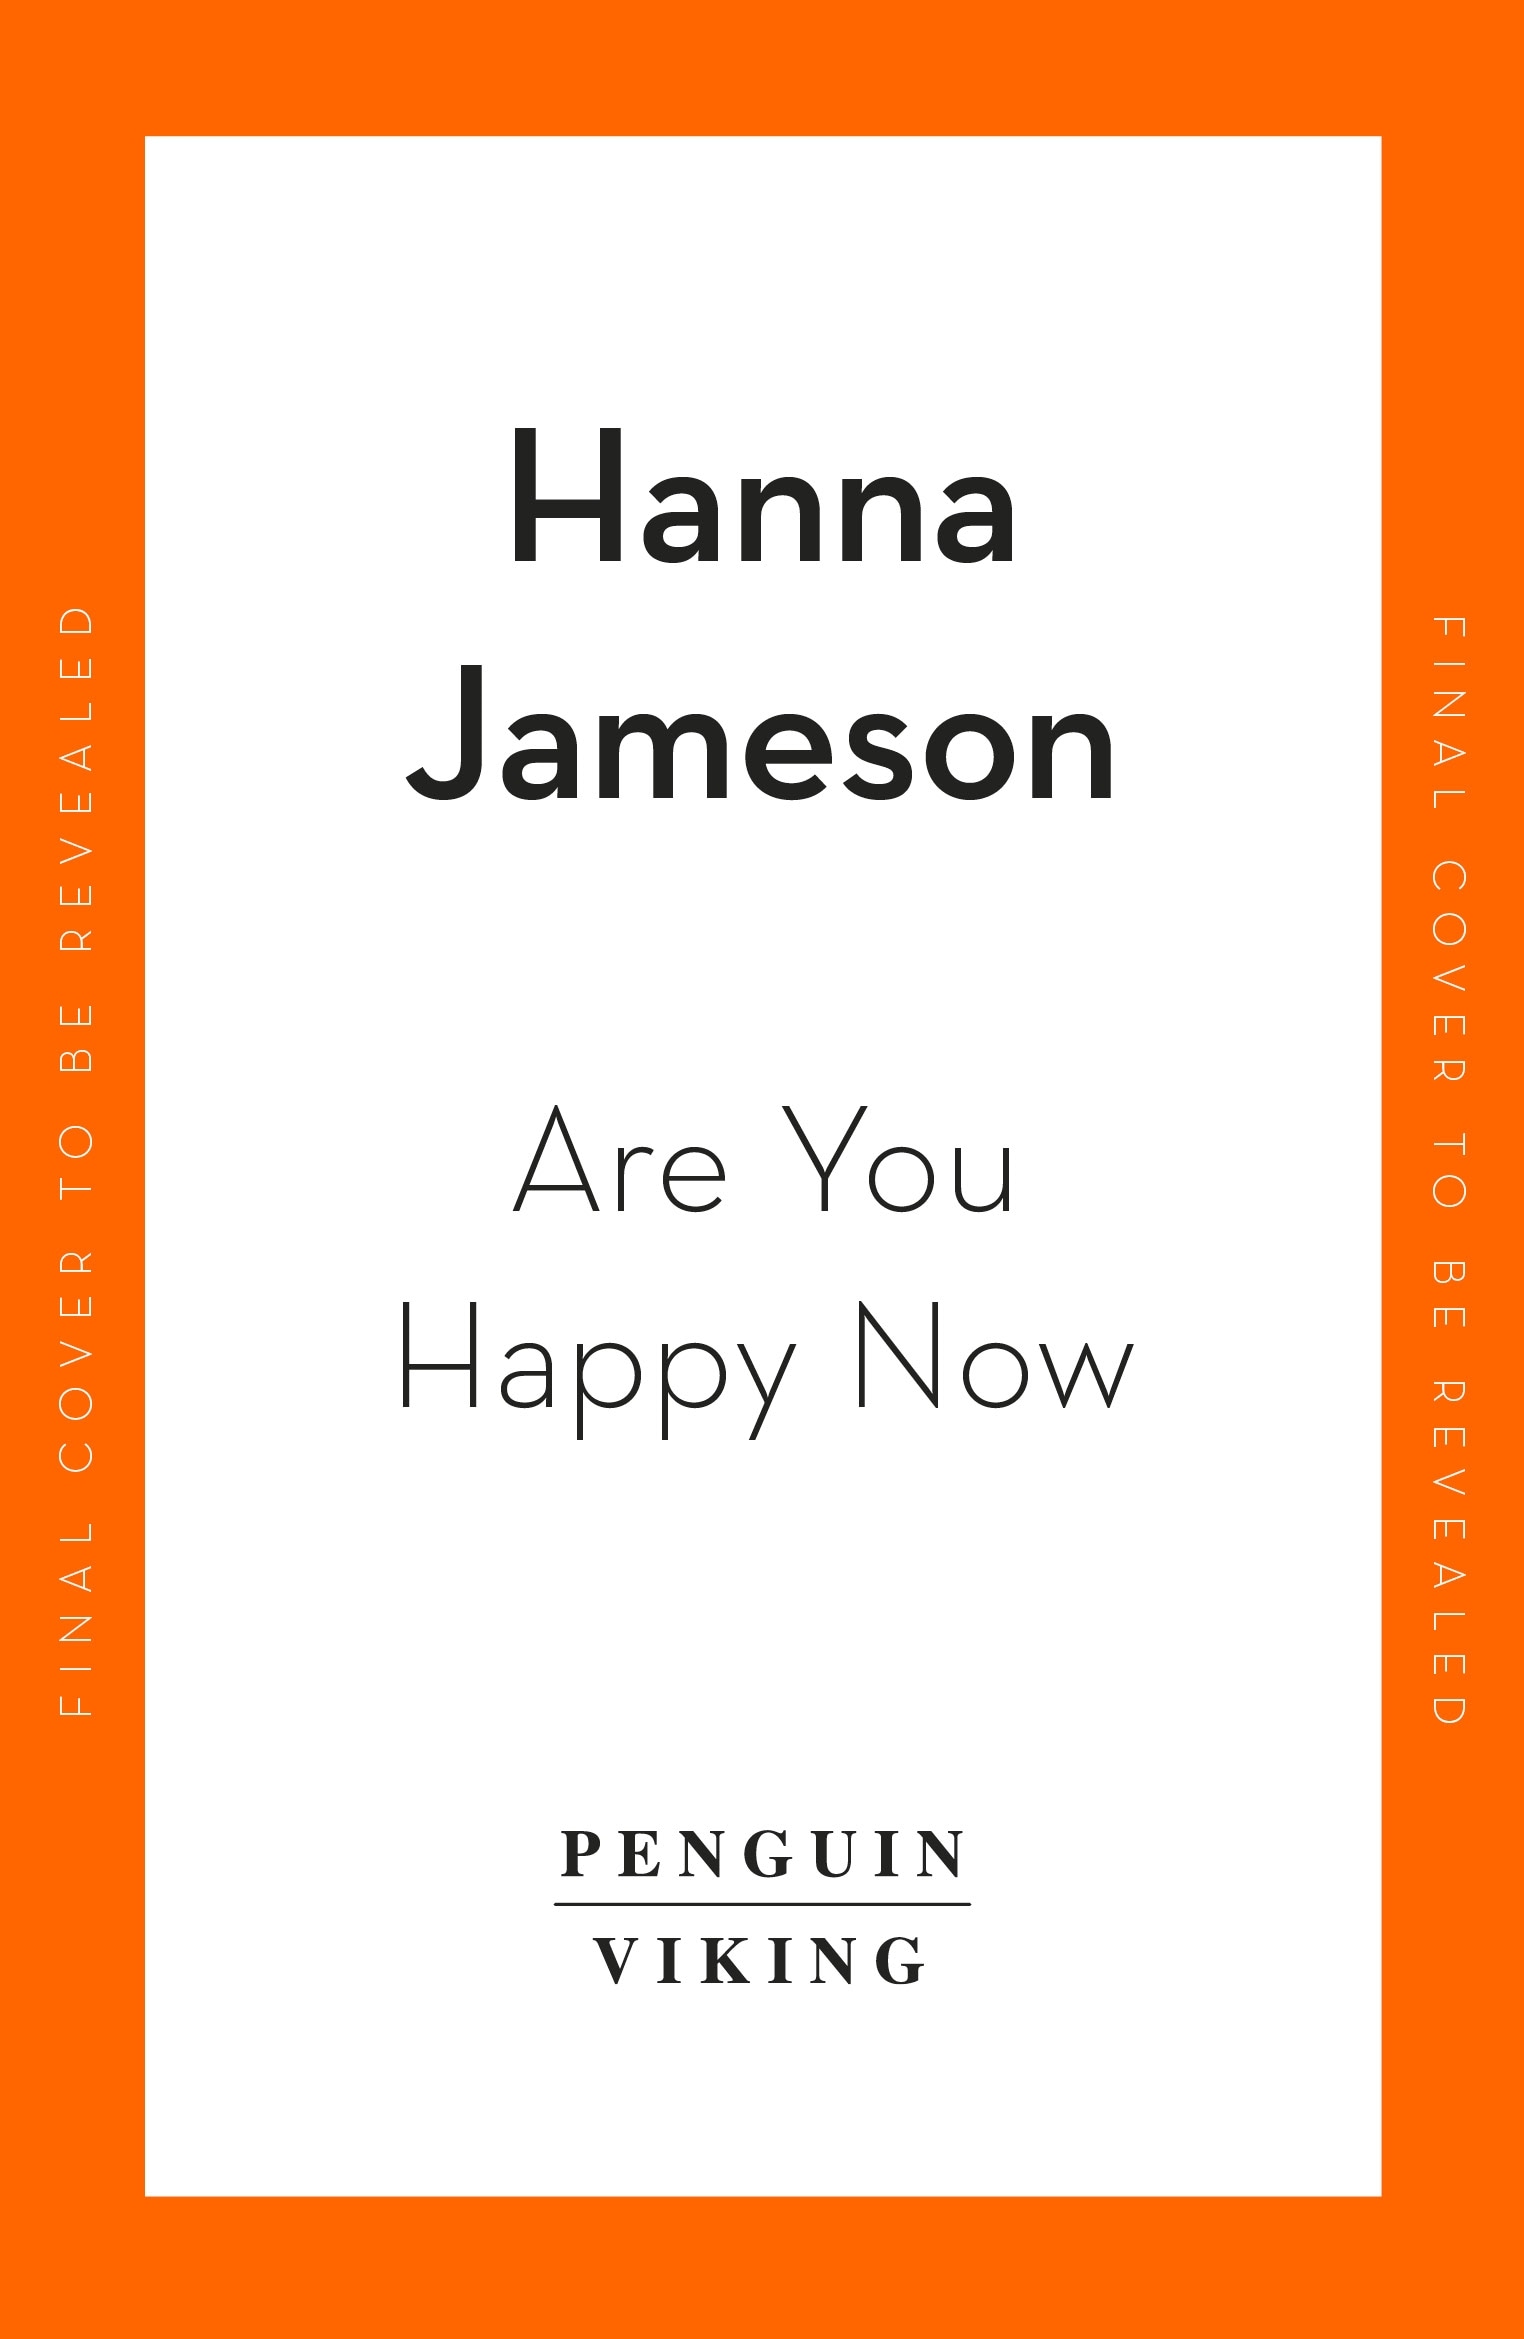 Book “Are You Happy Now” by Hanna Jameson — February 1, 2023